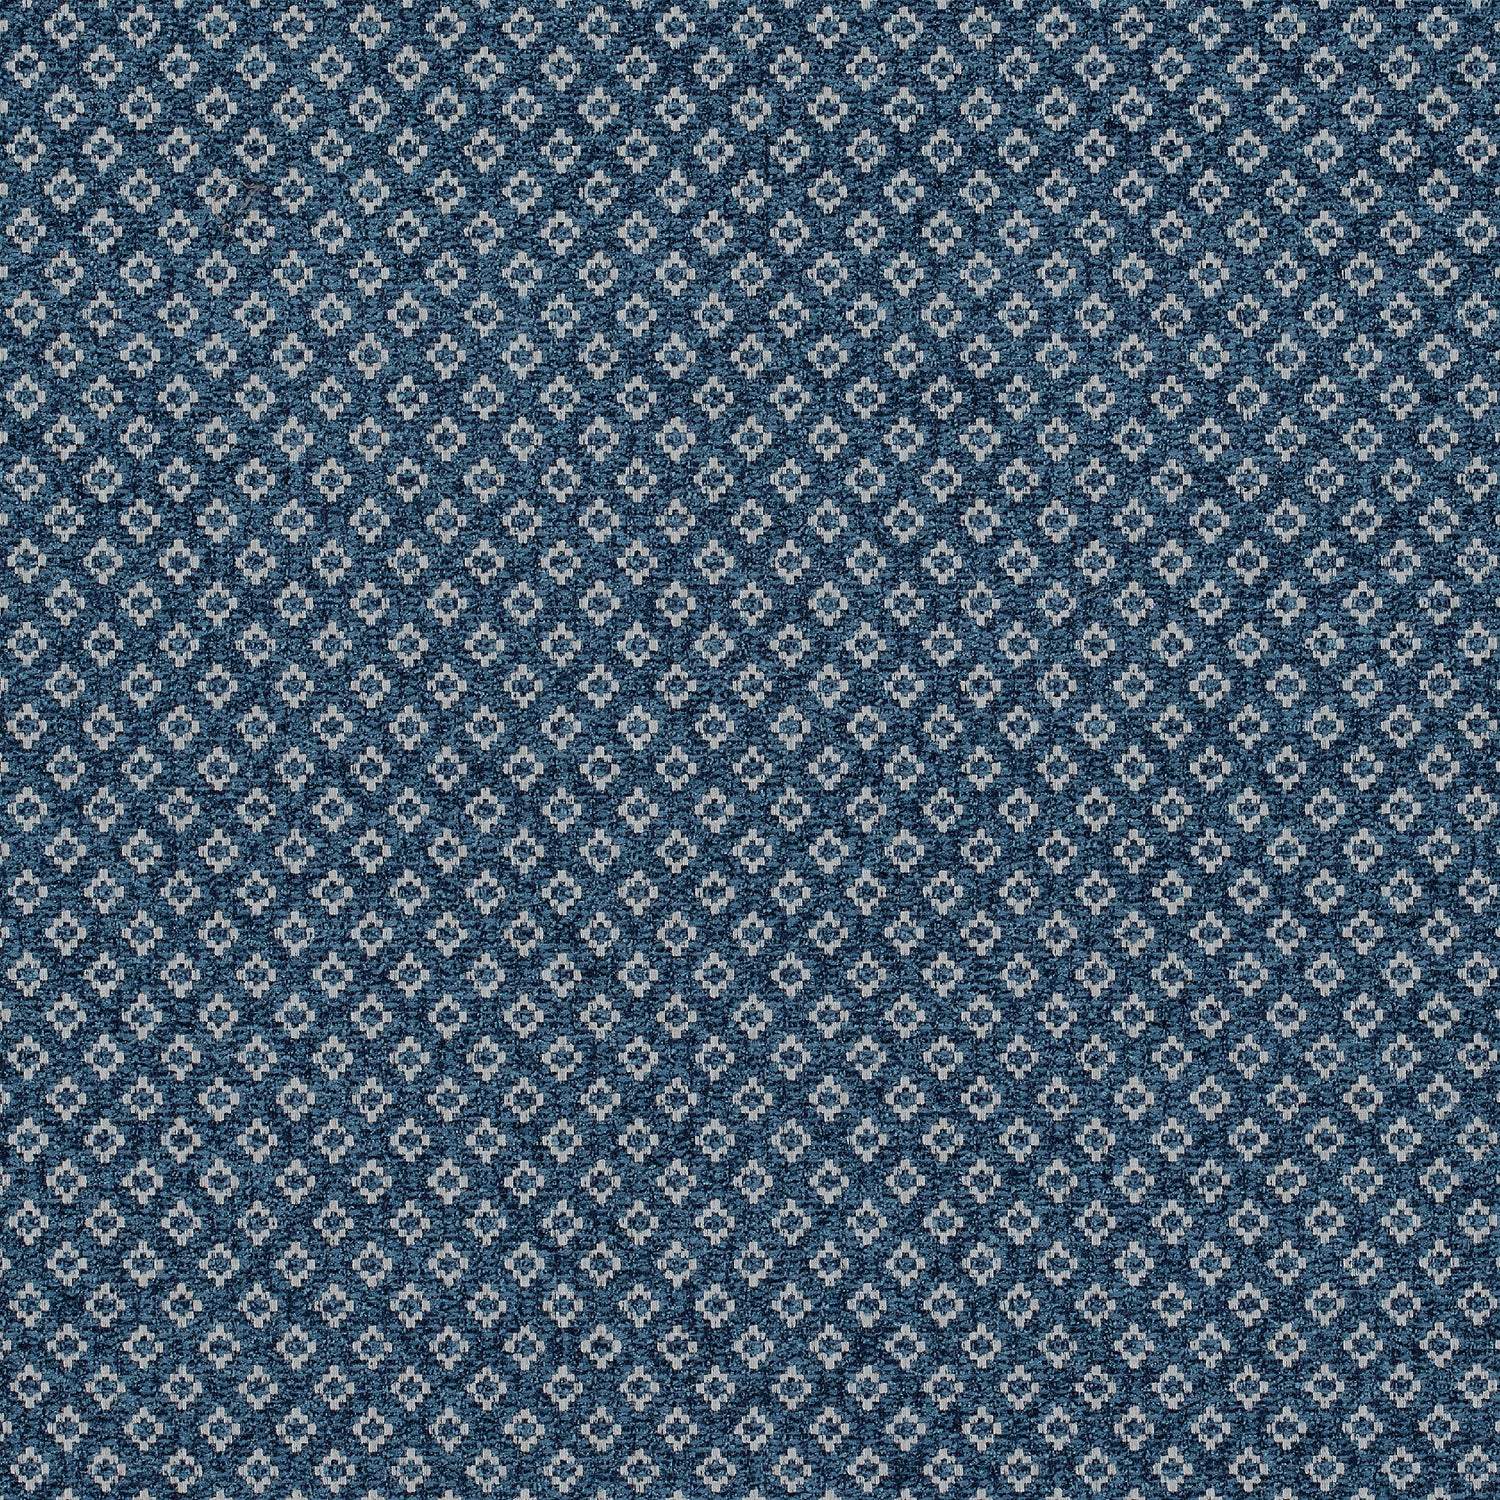 Claudio fabric in navy color - pattern number AW72997 - by Anna French in the Manor collection